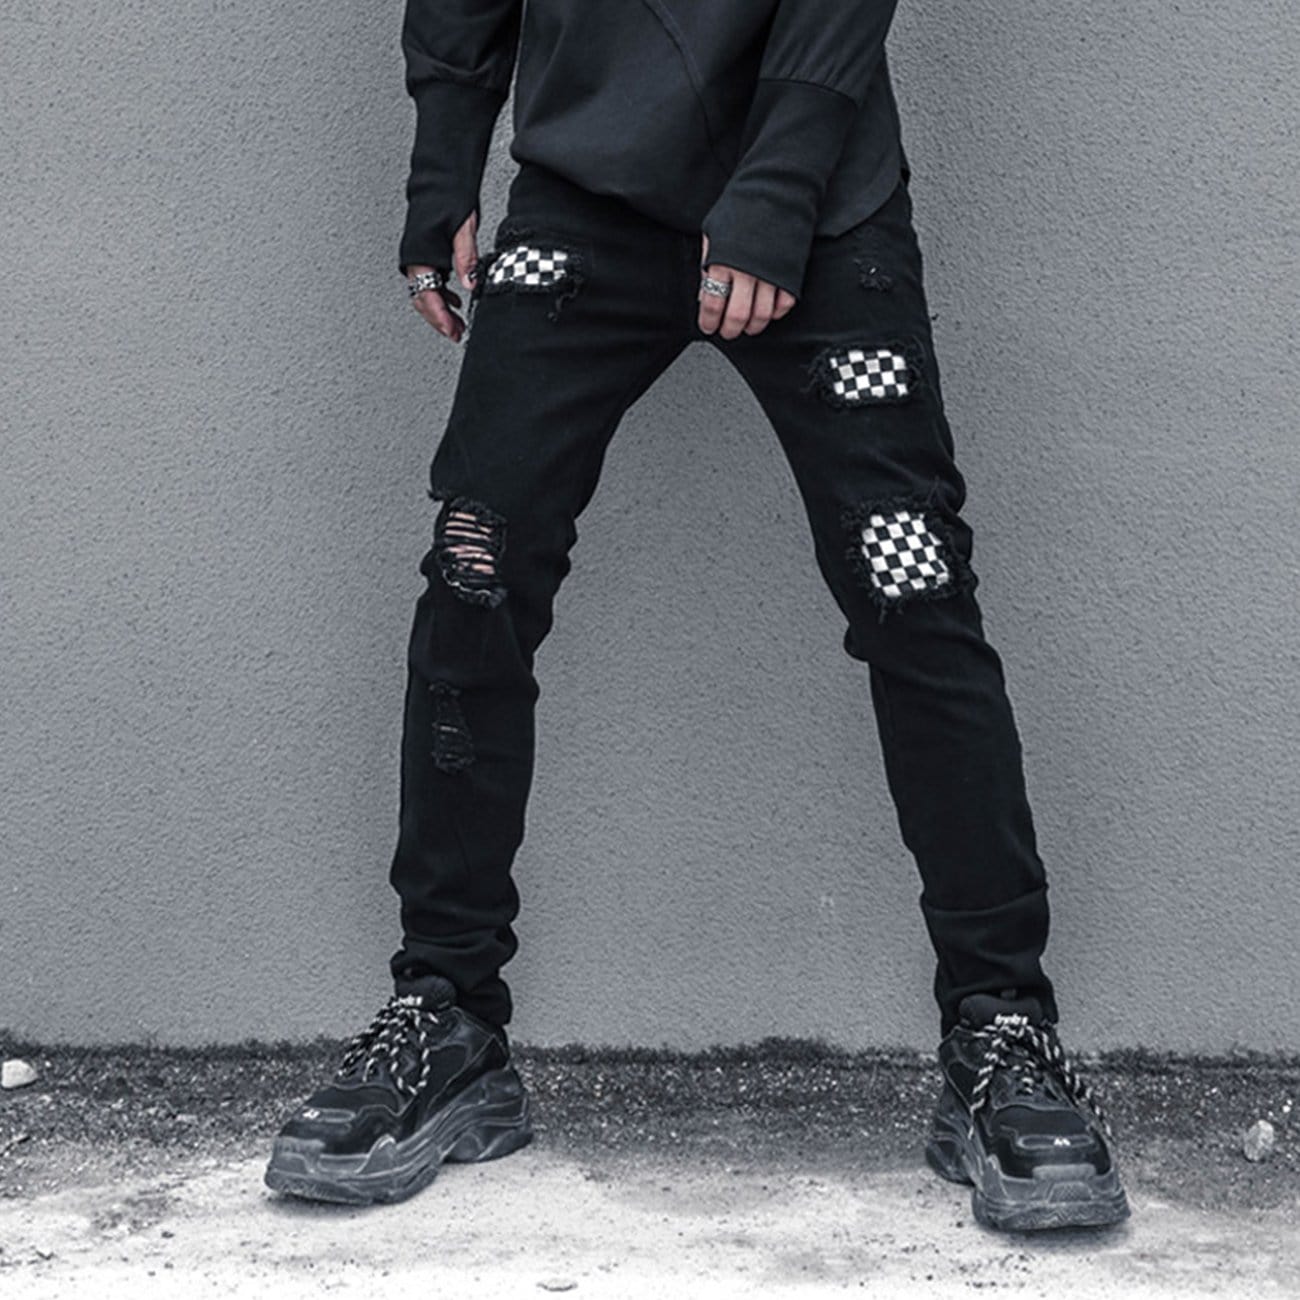 "Ripped Check" Jeans Streetwear Brand Techwear Combat Tactical YUGEN THEORY